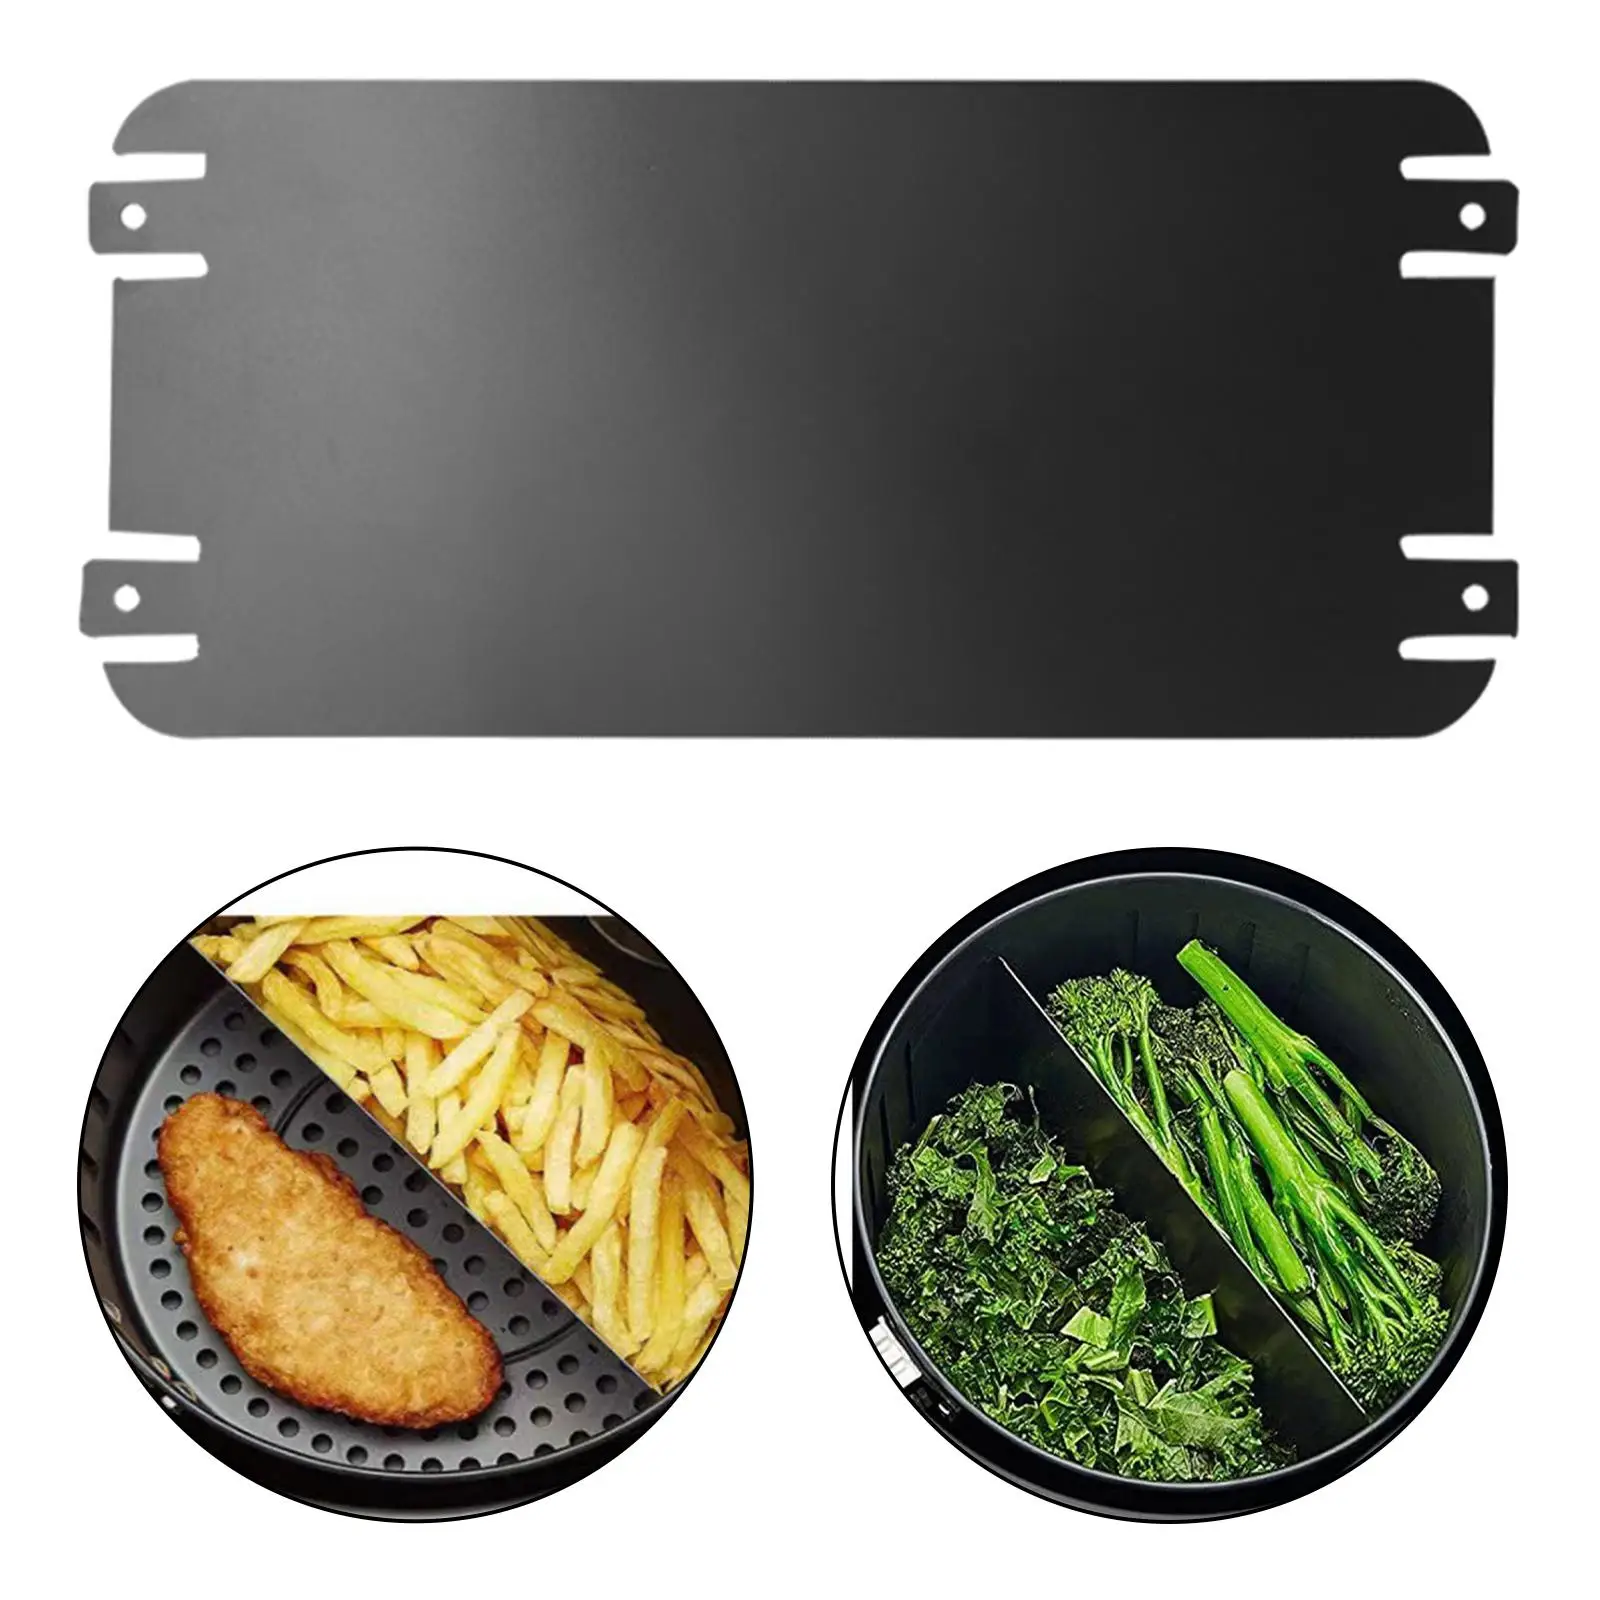 Air Fryer Cooking Divider Versatile Keeps Food Separated Double Layer Rack Non Stick Coating Durable Air Fryer Basket Separator